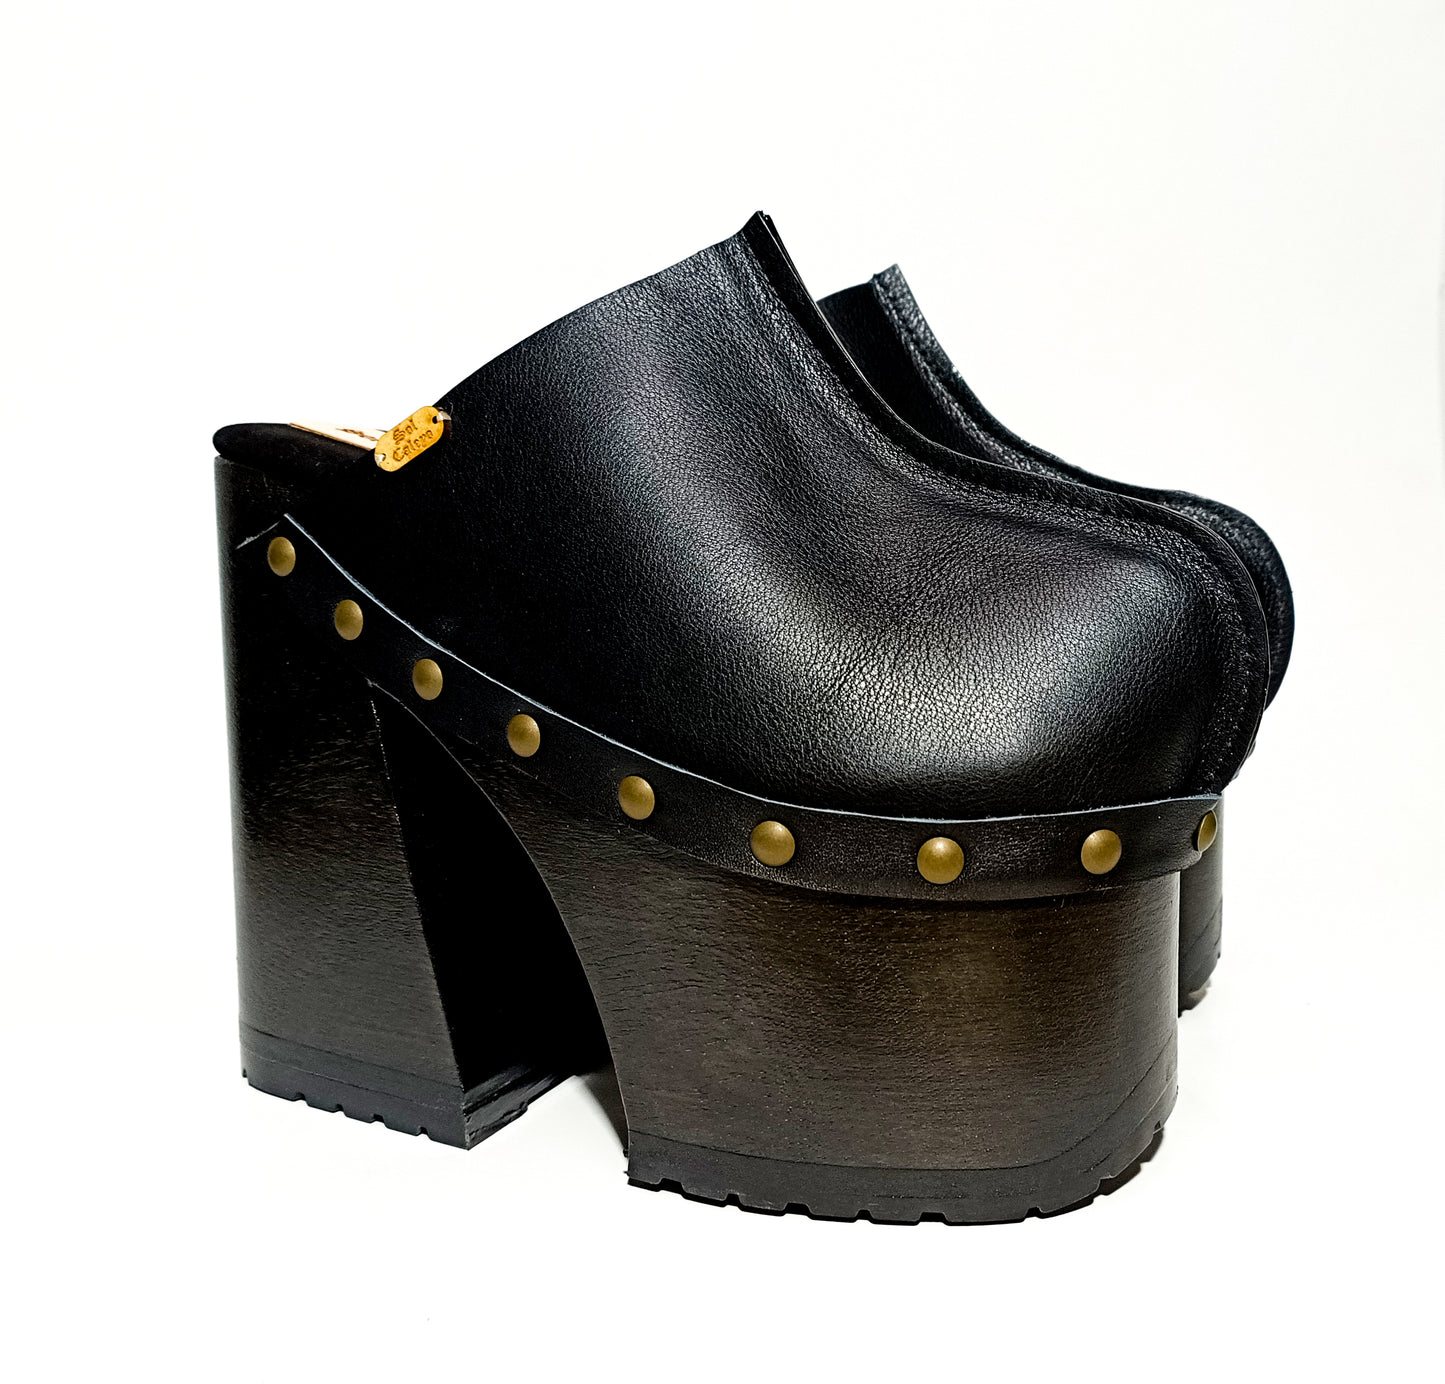 Vintage 70s style platform clogs, with super high heel, made in black leather. Sizes 34 to 47, handmade. Reserve yours now! Show an authentic vintage style!